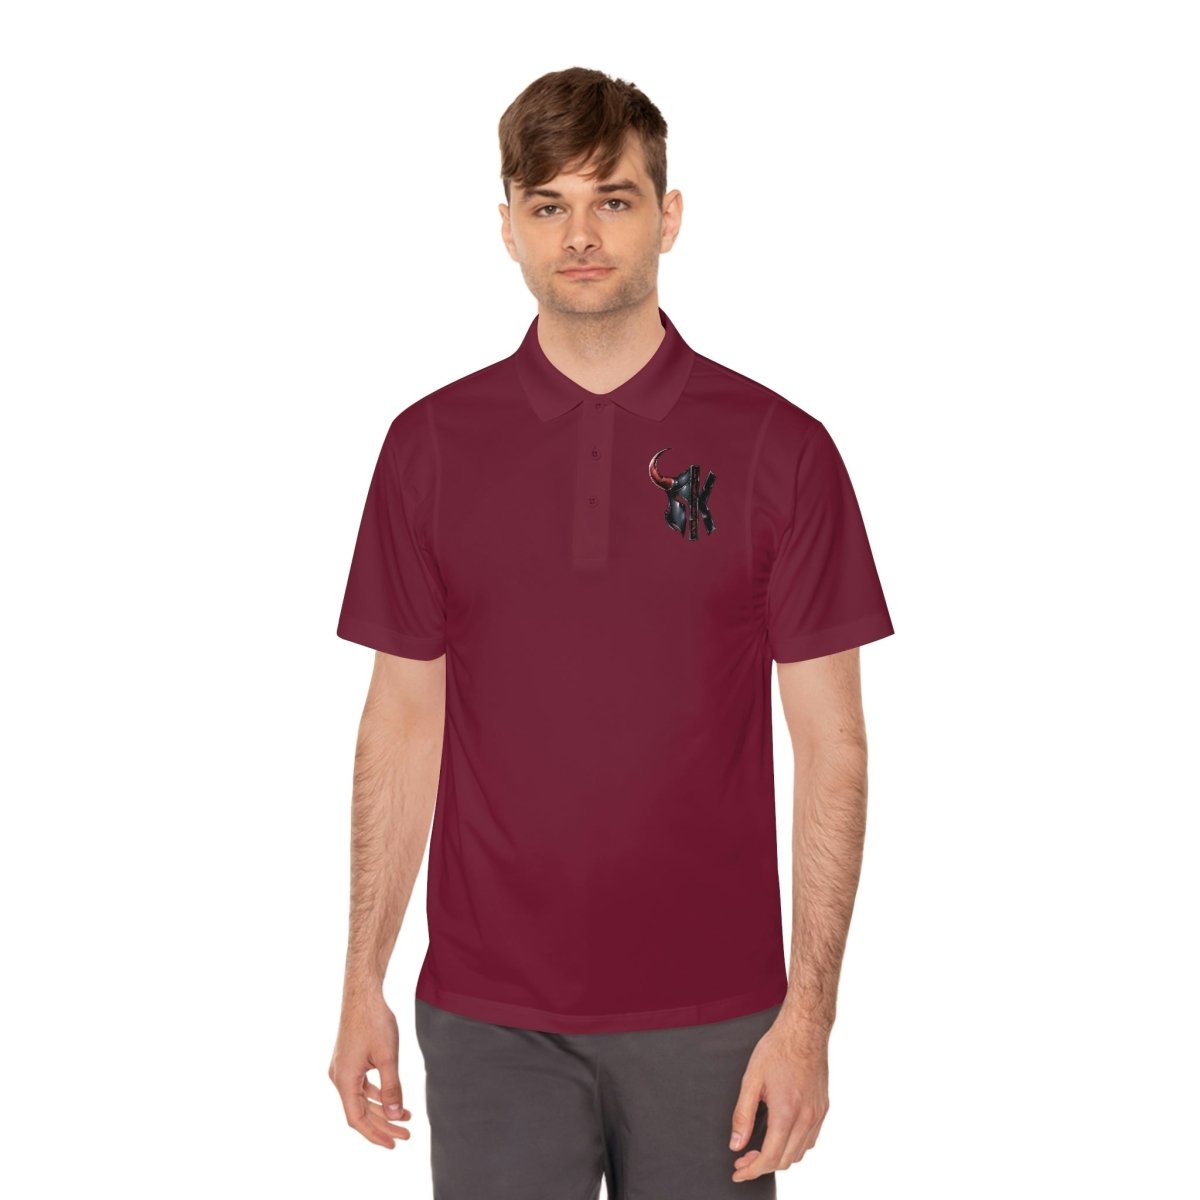 Men's Sport Polo Shirt - RockSolid Scales - Maroon